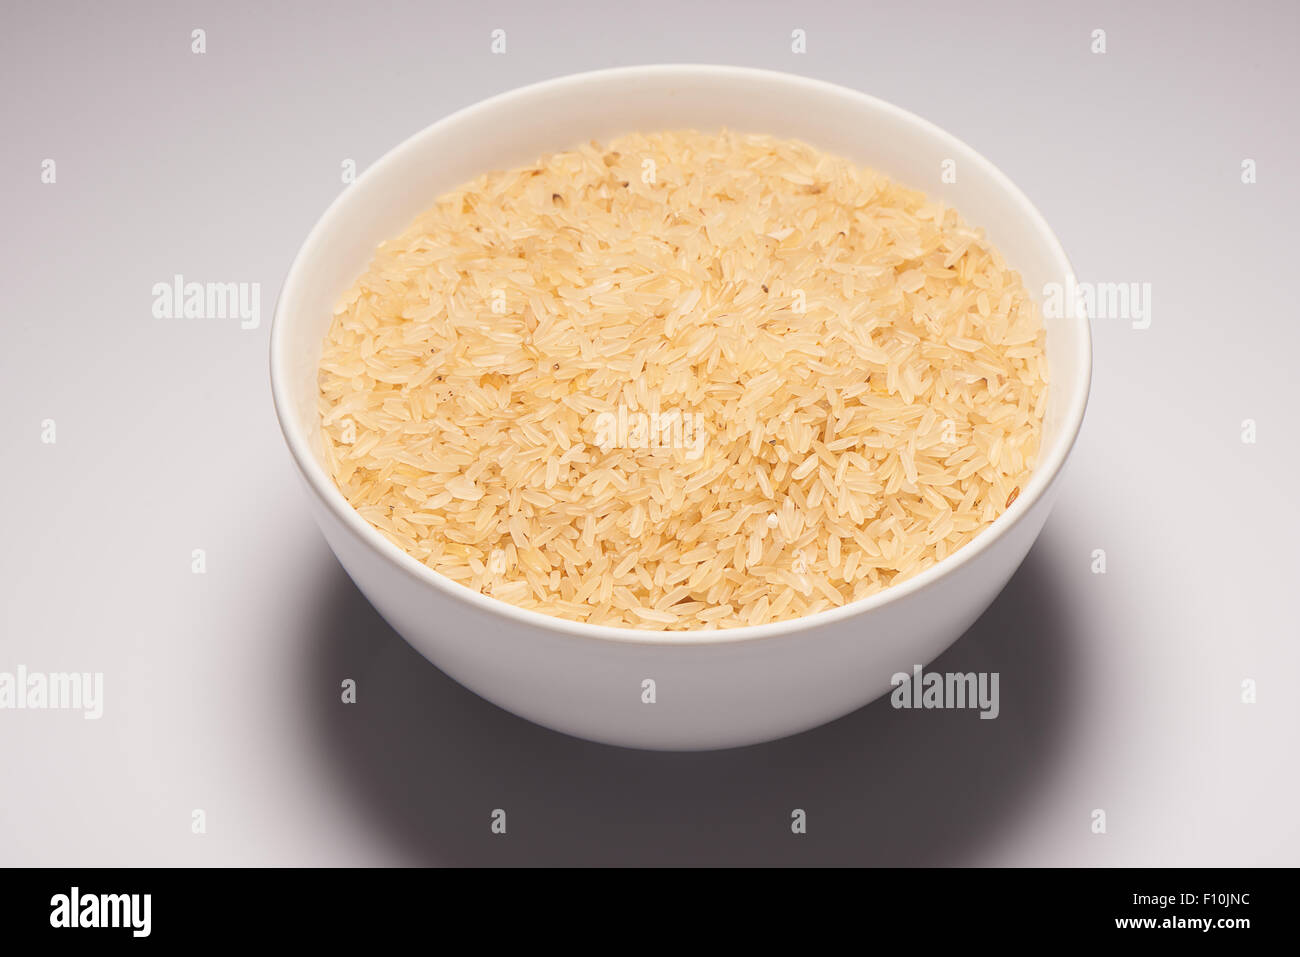 Brown rice seeds in white ceramic bowl on white background Stock Photo